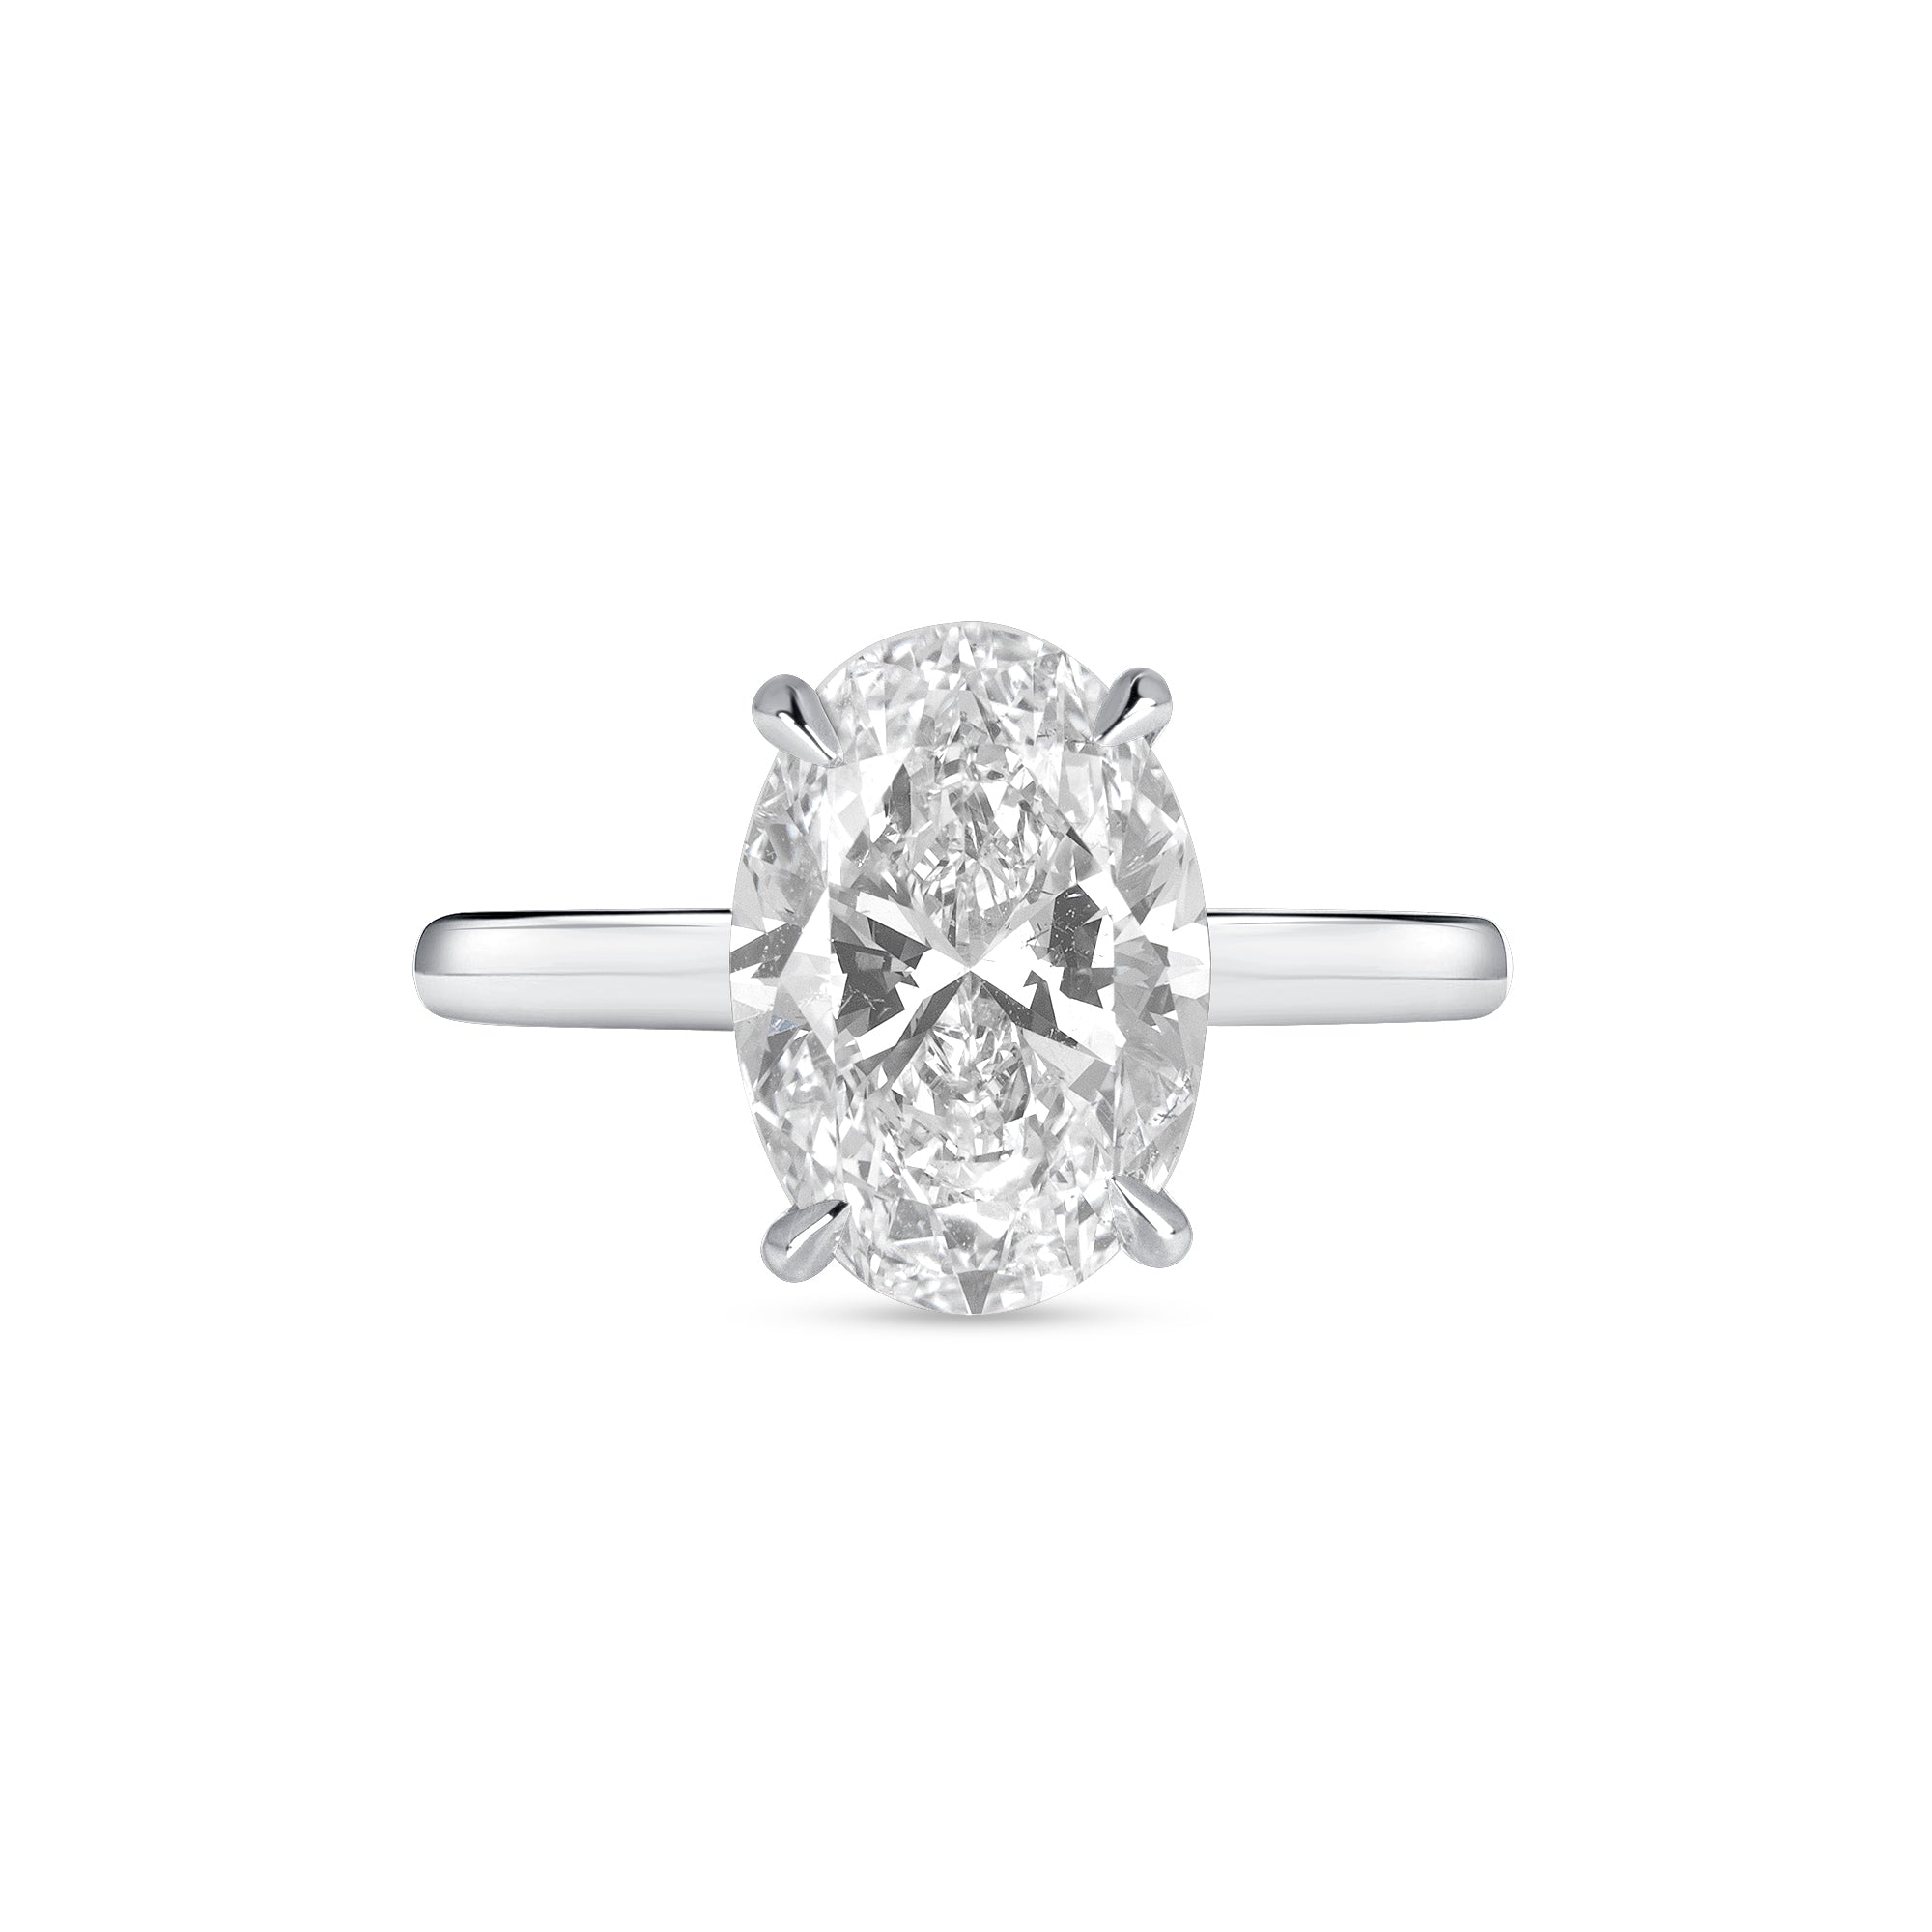 3.51ct Oval Cut Diamond Solitaire Ring in Platinum Band, GIA Certified